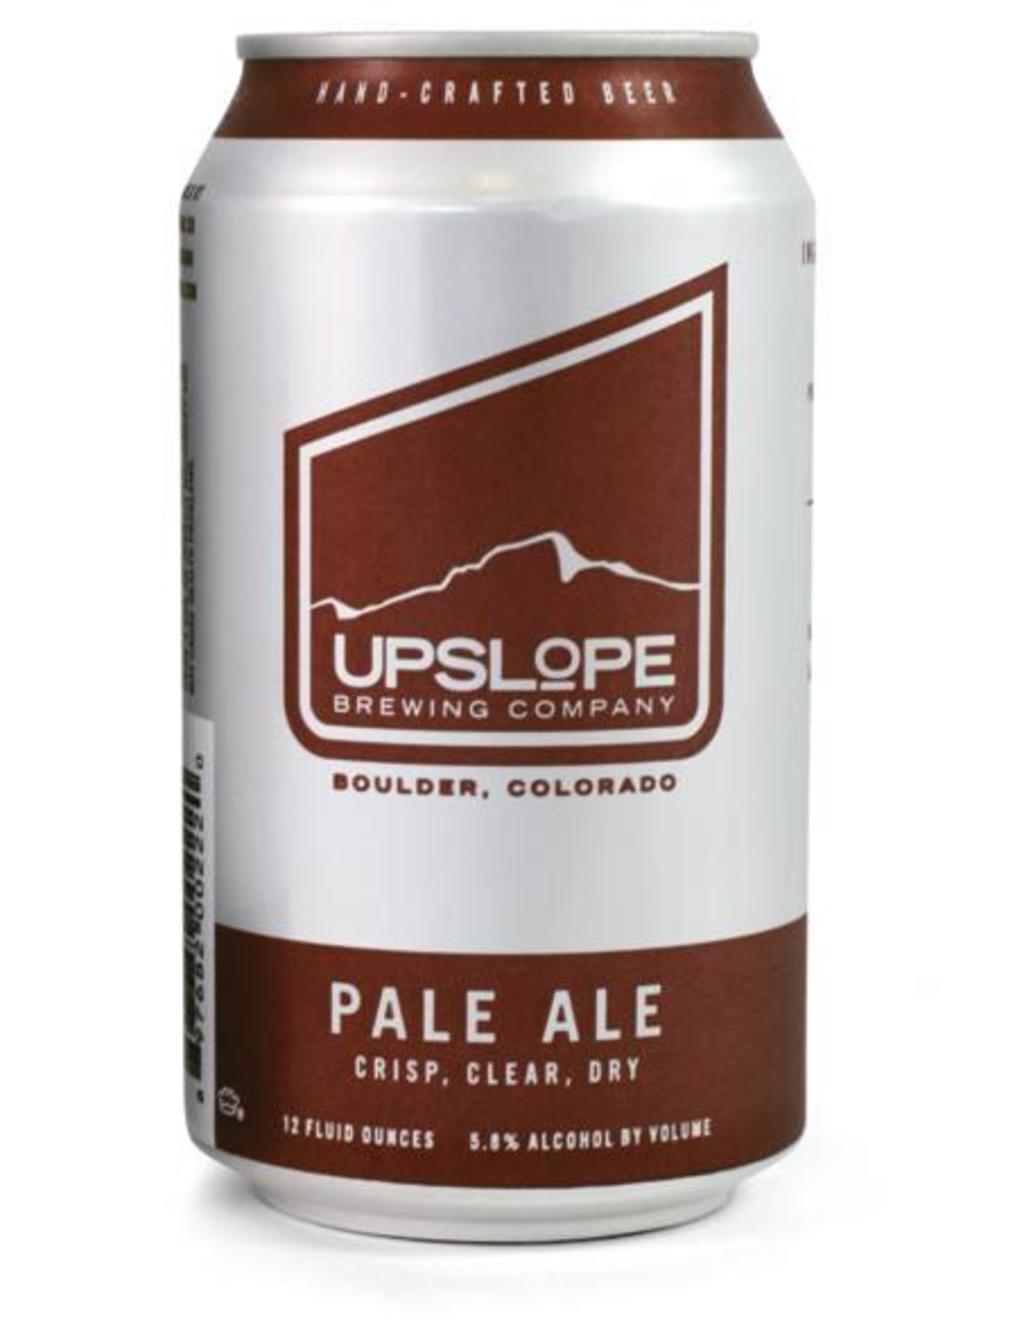 Upslope Review, Upslope Pale Ale Review, Beer Review, Pale Ale Review